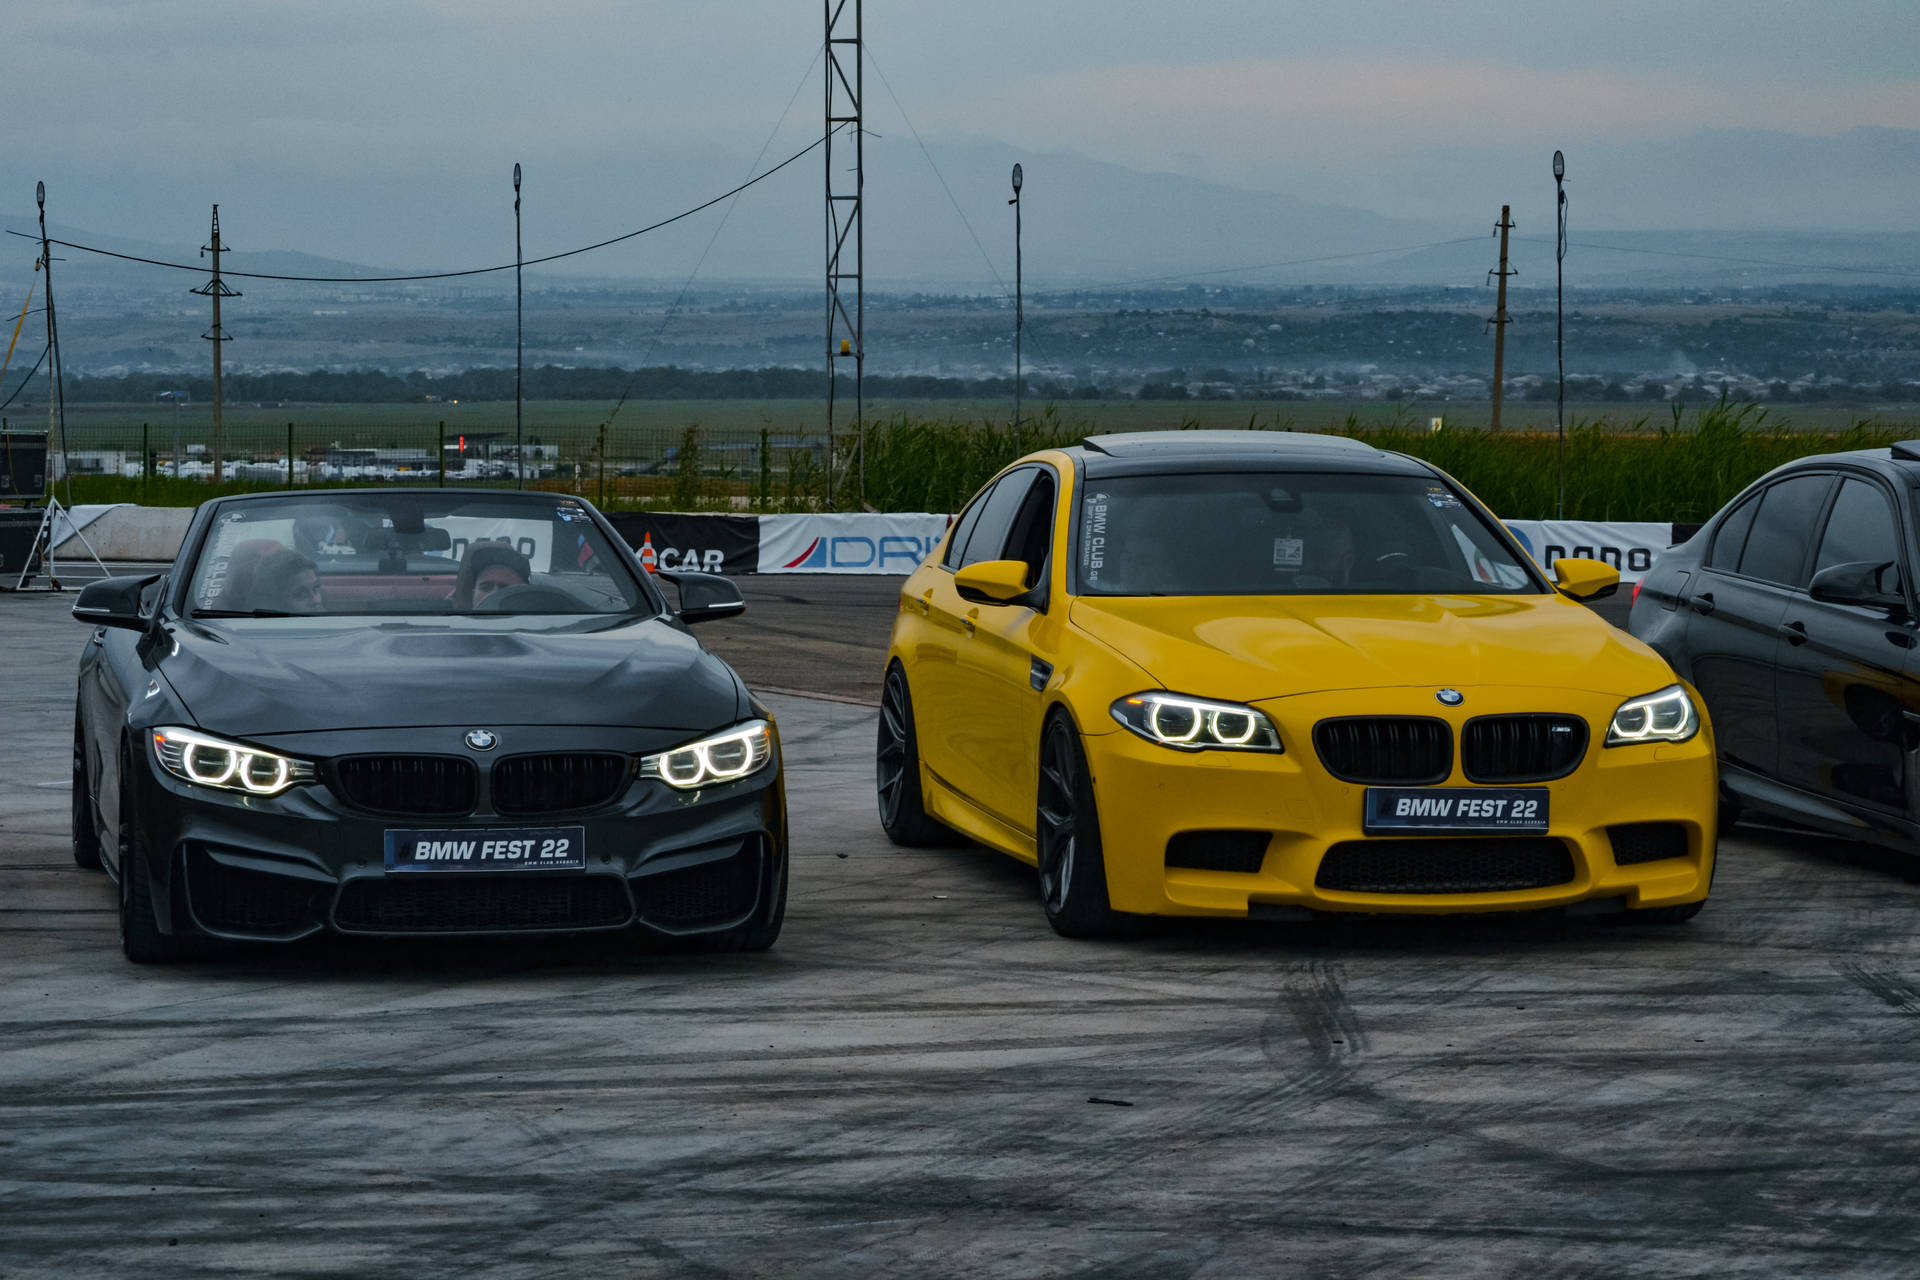 Bmw Cars At Racing Track Background